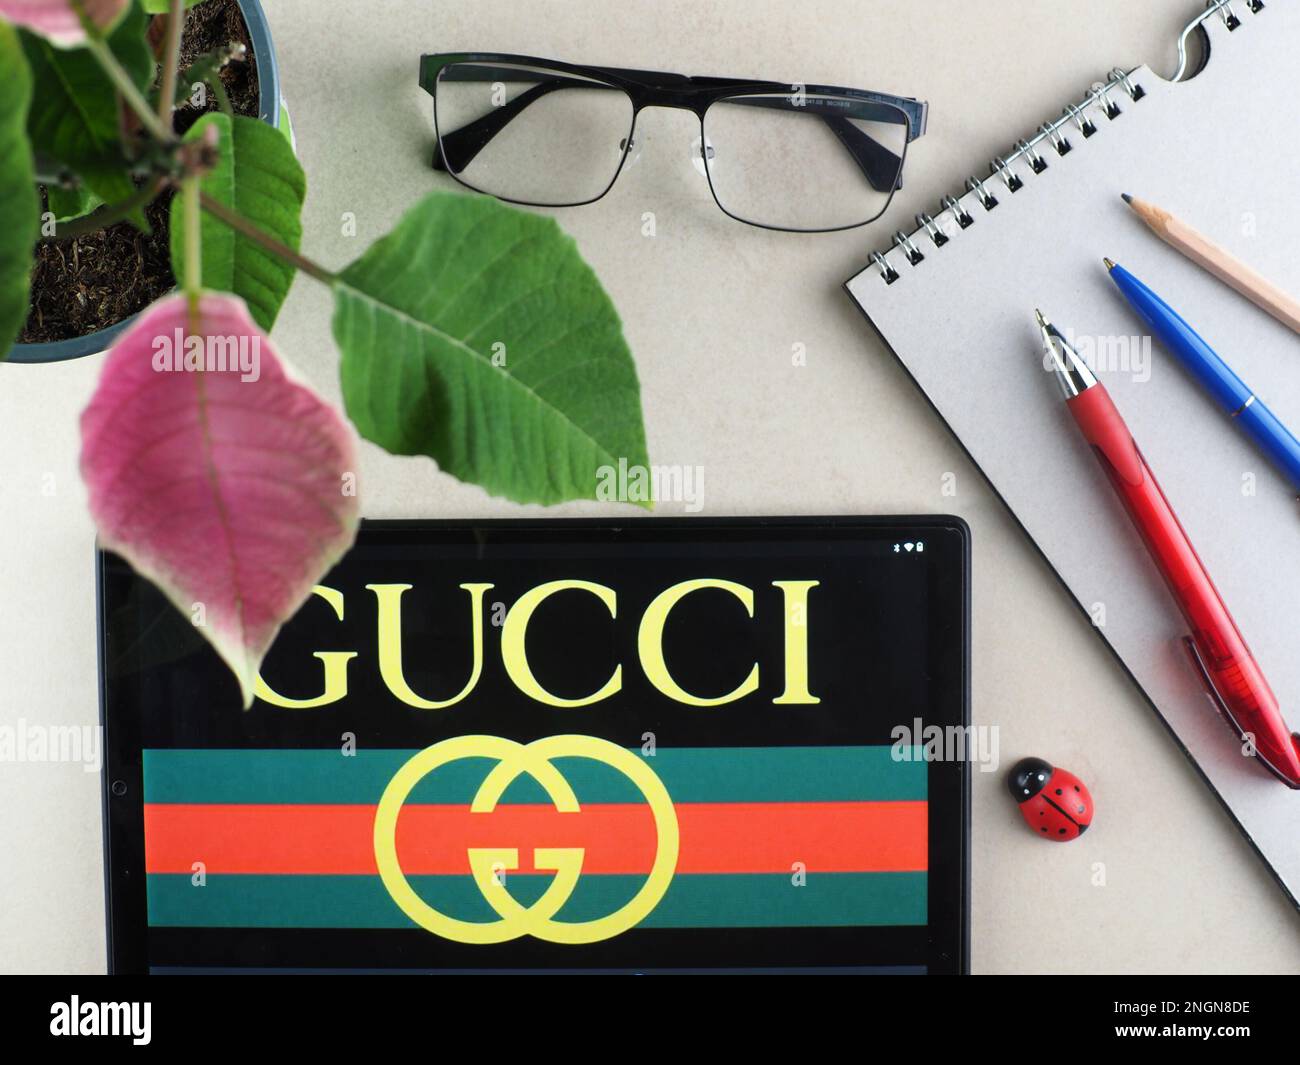 Gucci brand Stock Vector Images - Alamy